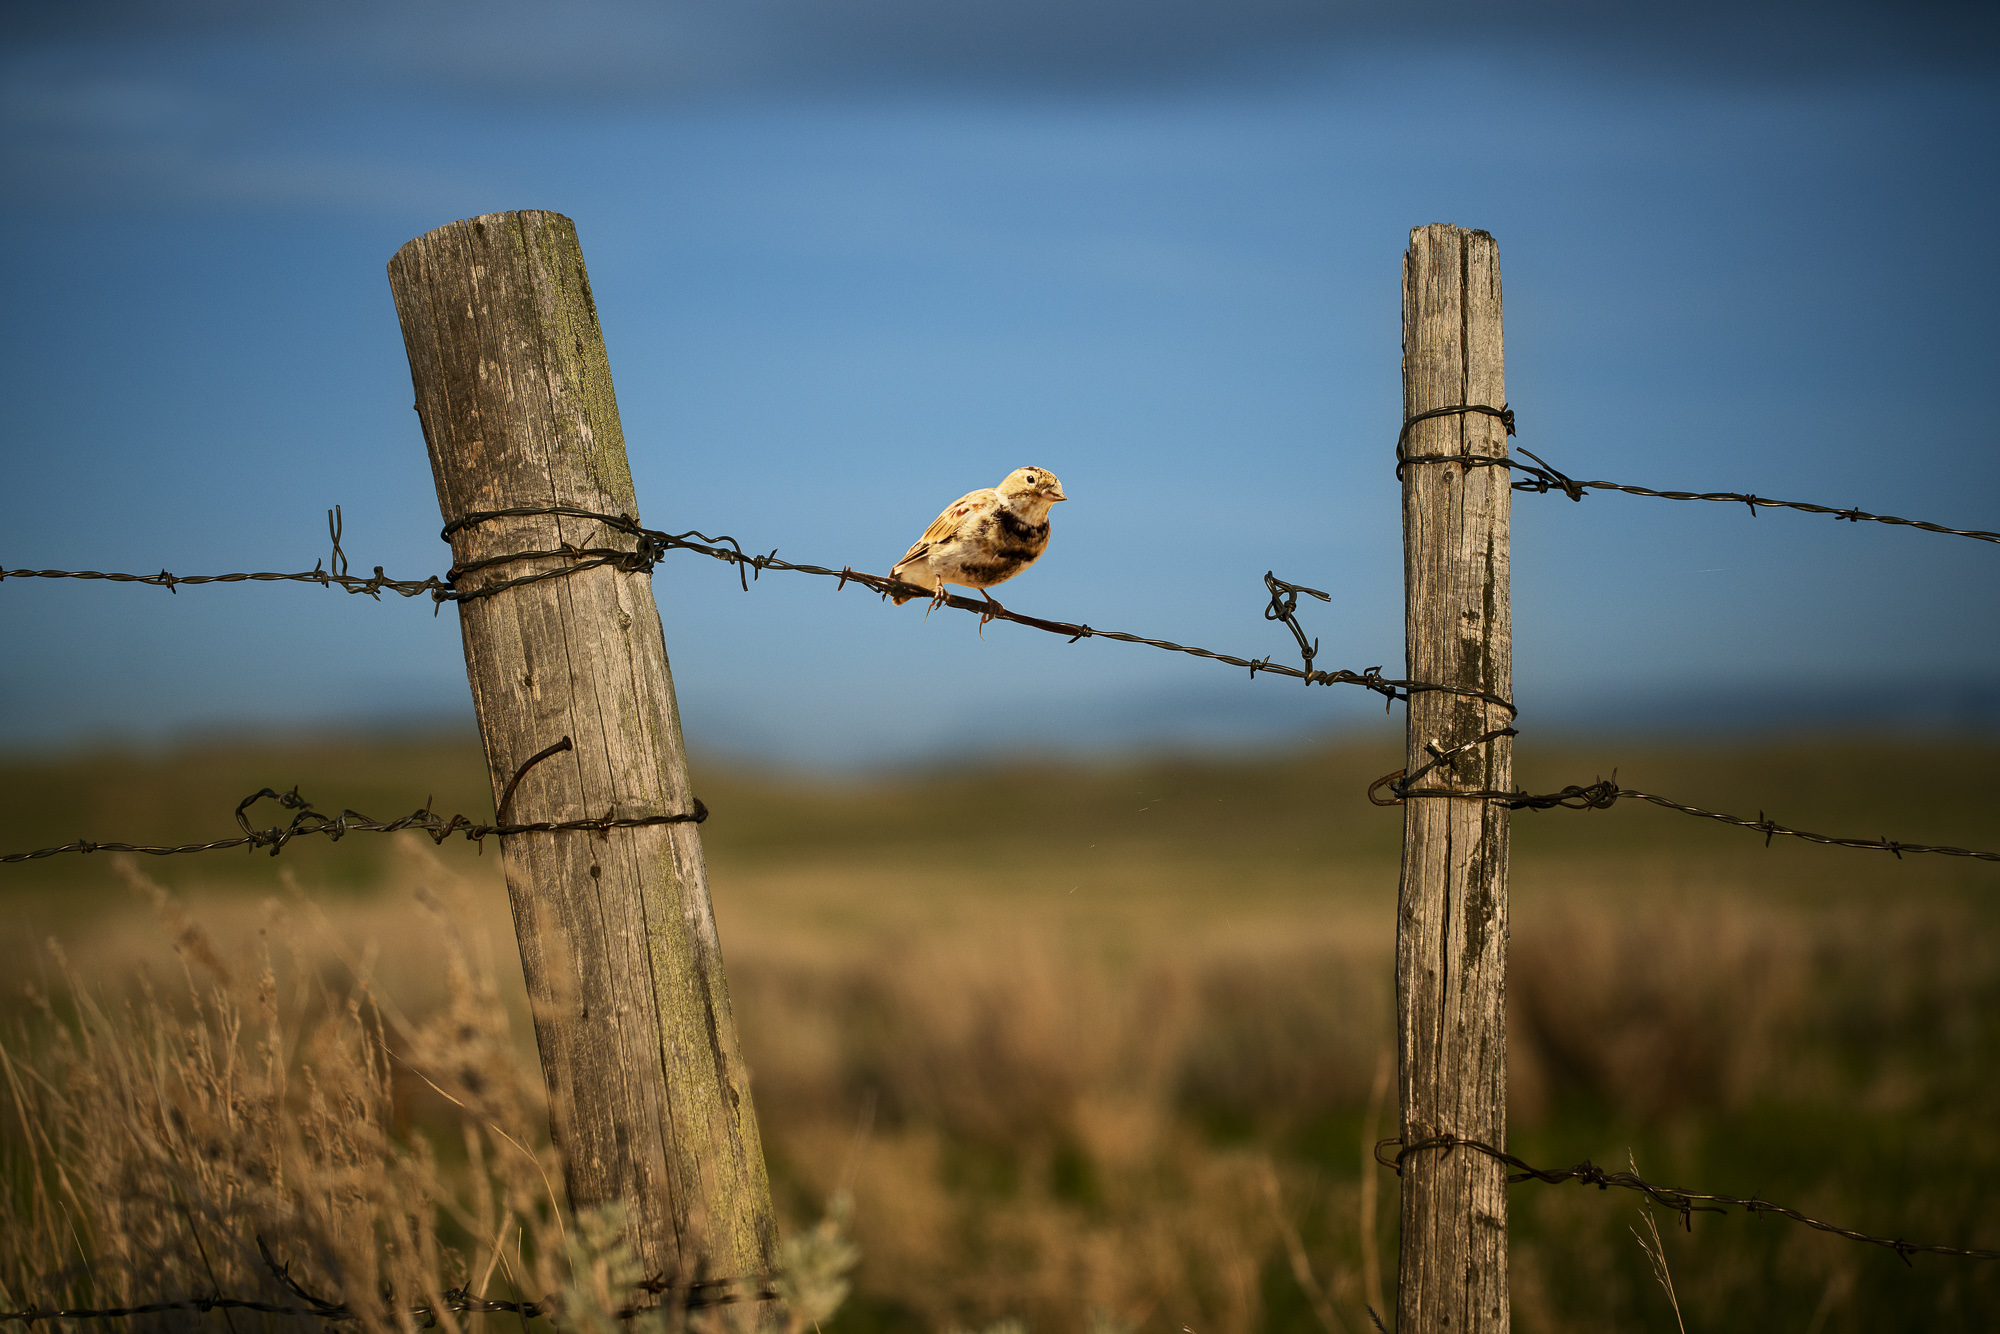 A photograph of a paper cutout of a photo of a Thick-billed Longspur bird sitting on a barbed wire strung between two fence posts. The background, which is out of focus, has a bright blue sky and field of green and amber prairie grassland. There is a glow of late afternoon light in the image.